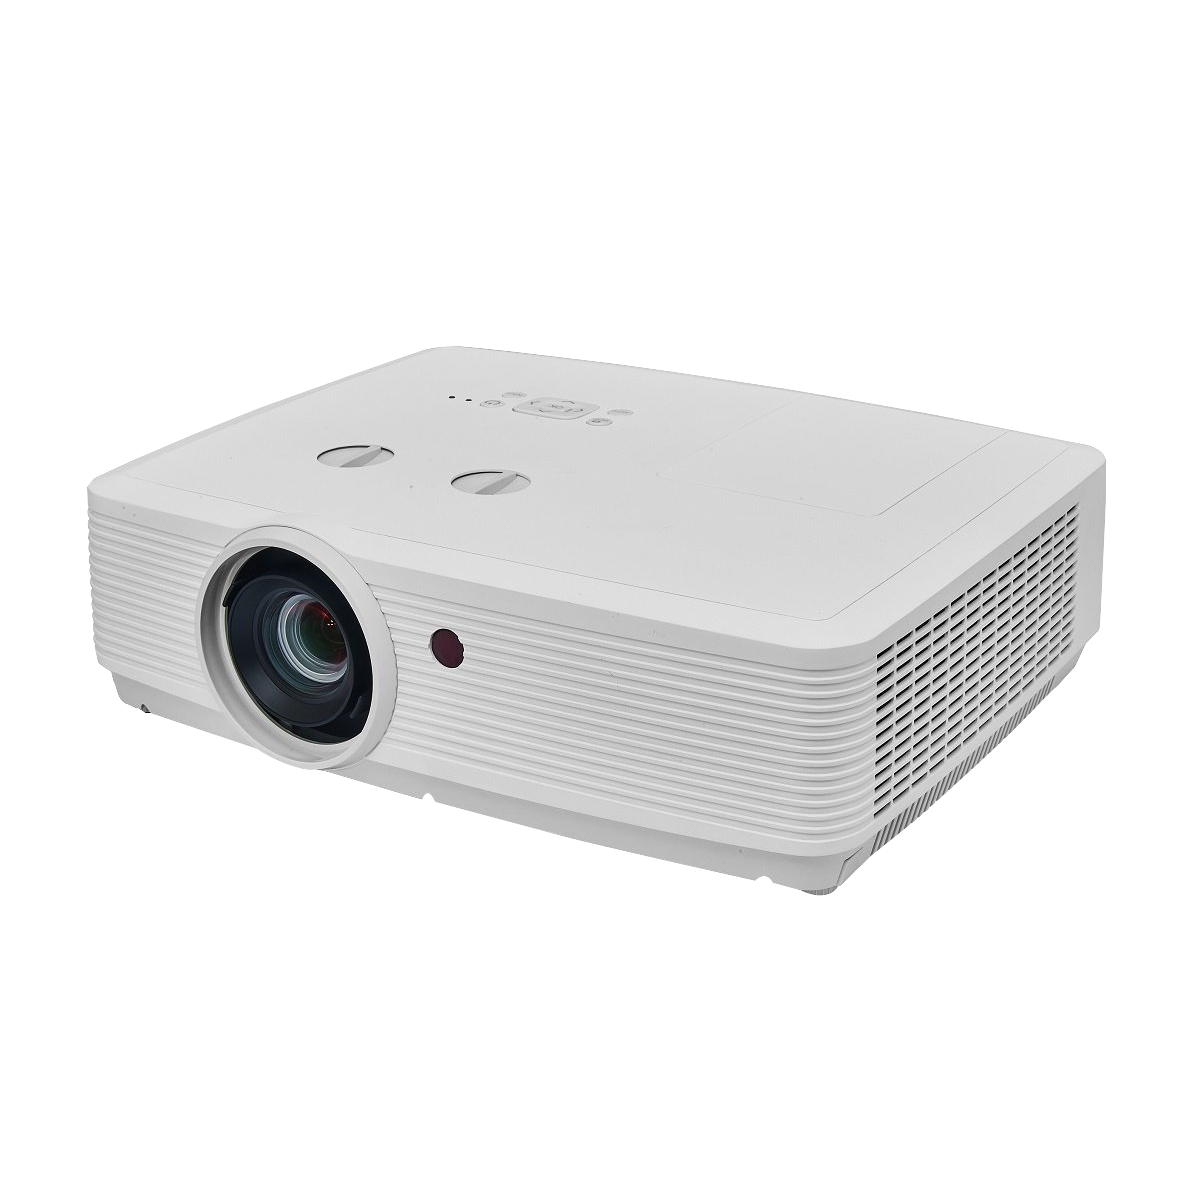 SMX 6000 Lumens WXGA 3LCD Projector Multimedia Home Theater Video Projector